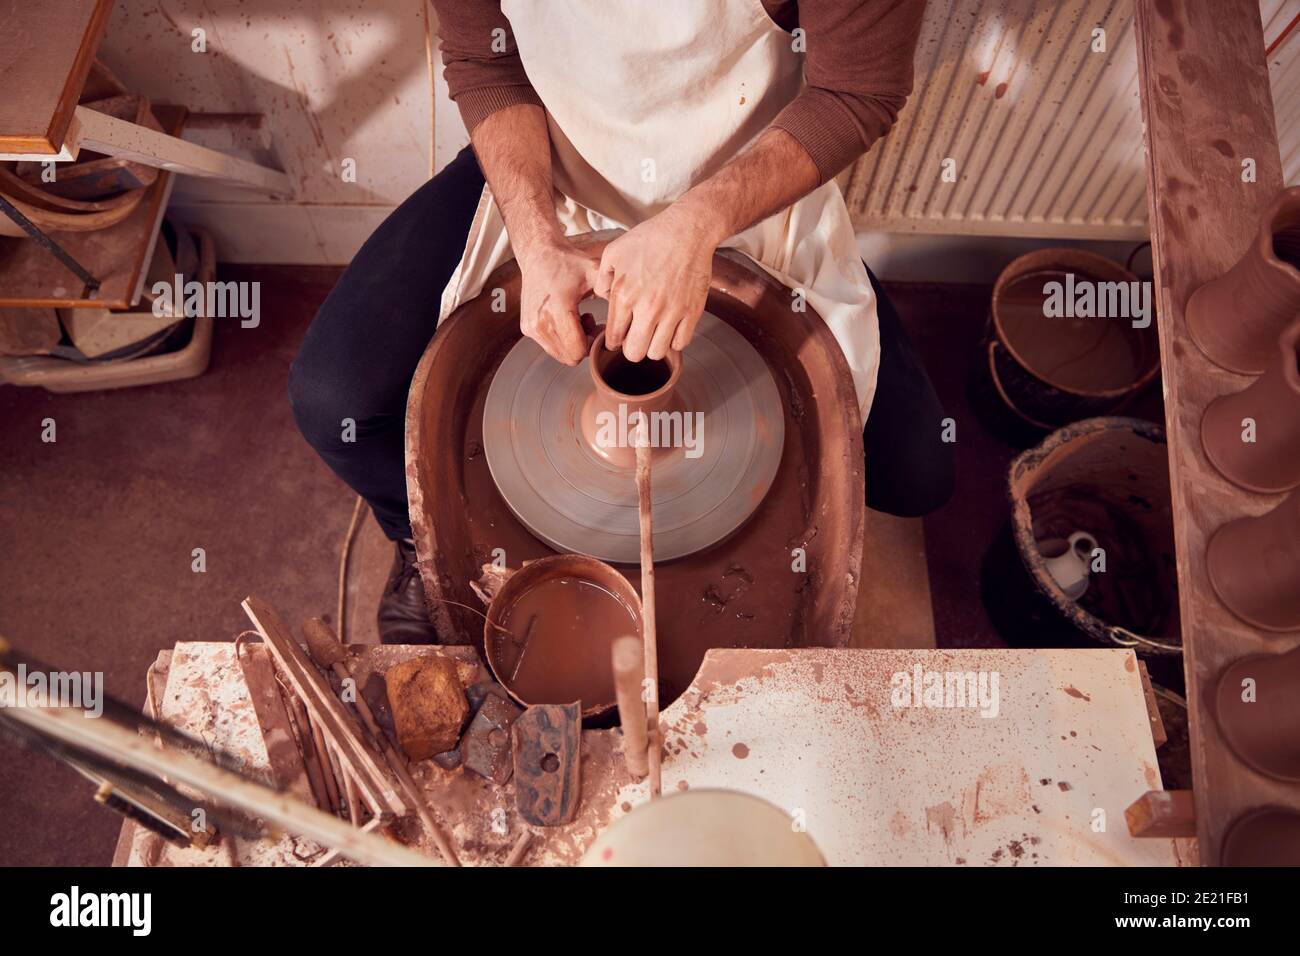 Close Up Of Male Potter Shaping Clay For Pot On Pottery Wheel In Ceramics Studio Stock Photo